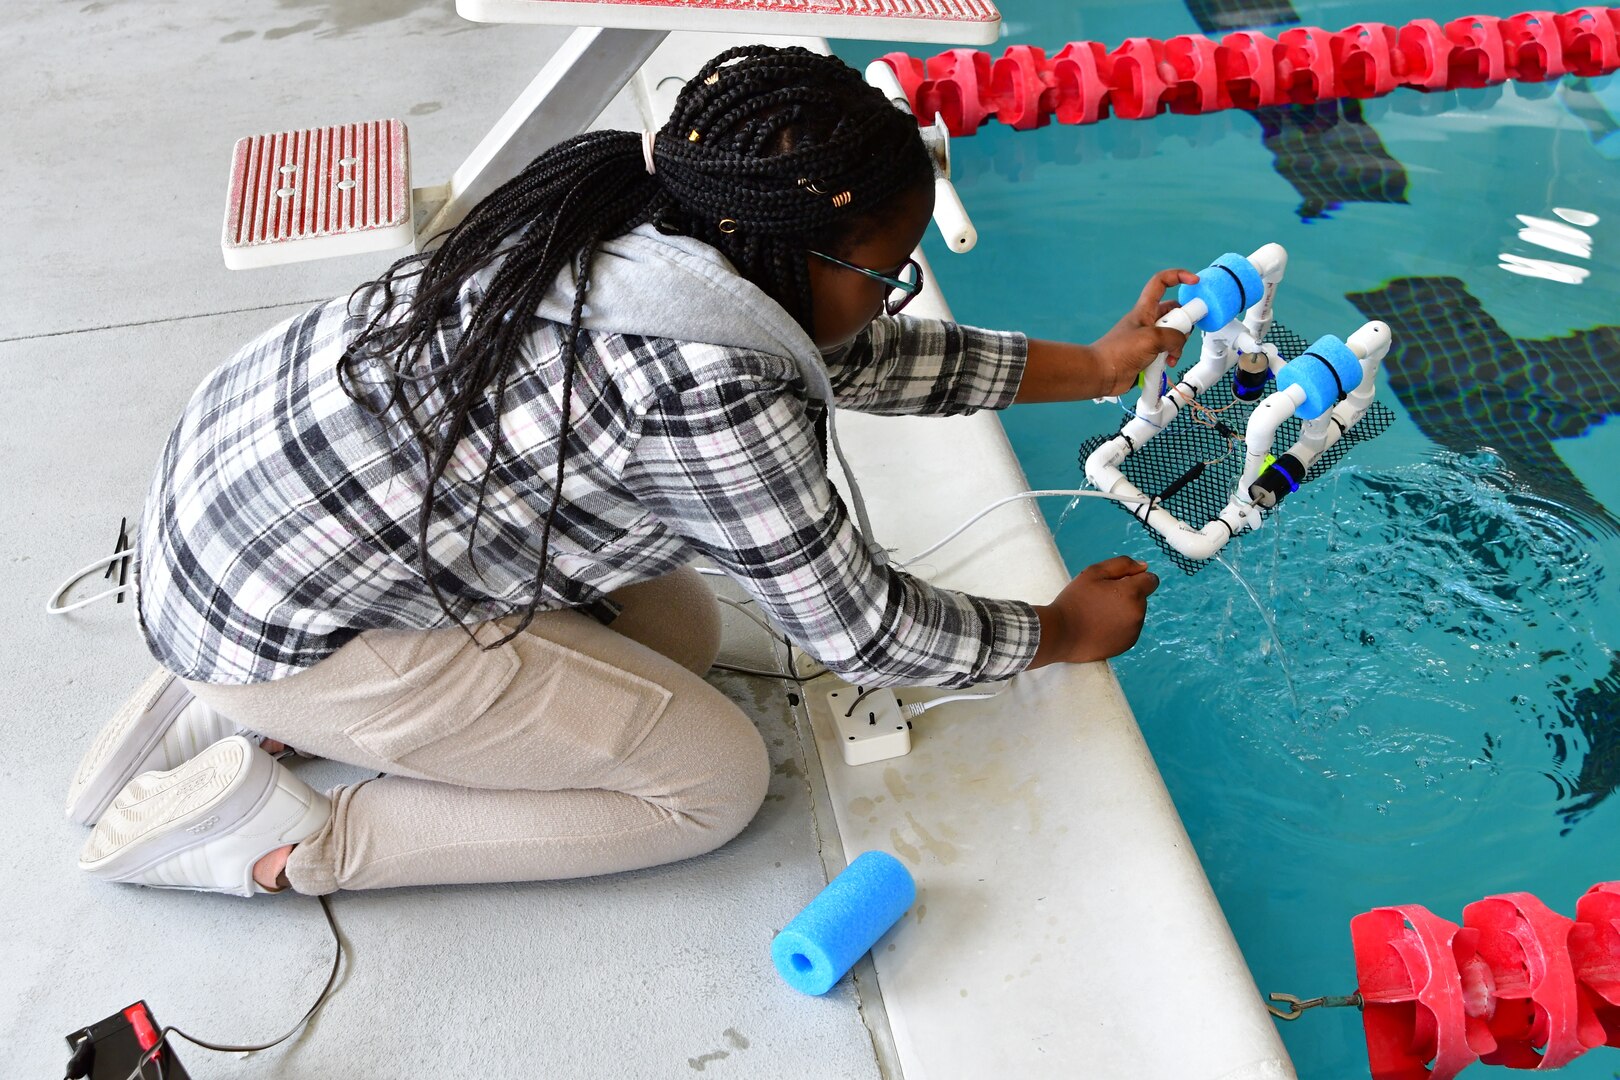 IMAGE: A student participates in the 2023 Naval Surface Warfare Center Division SeaPerch Regional Competition held at the King George YMCA March 18. SeaPerch is an underwater robotics program that enables students to build a remotely operated vehicle.